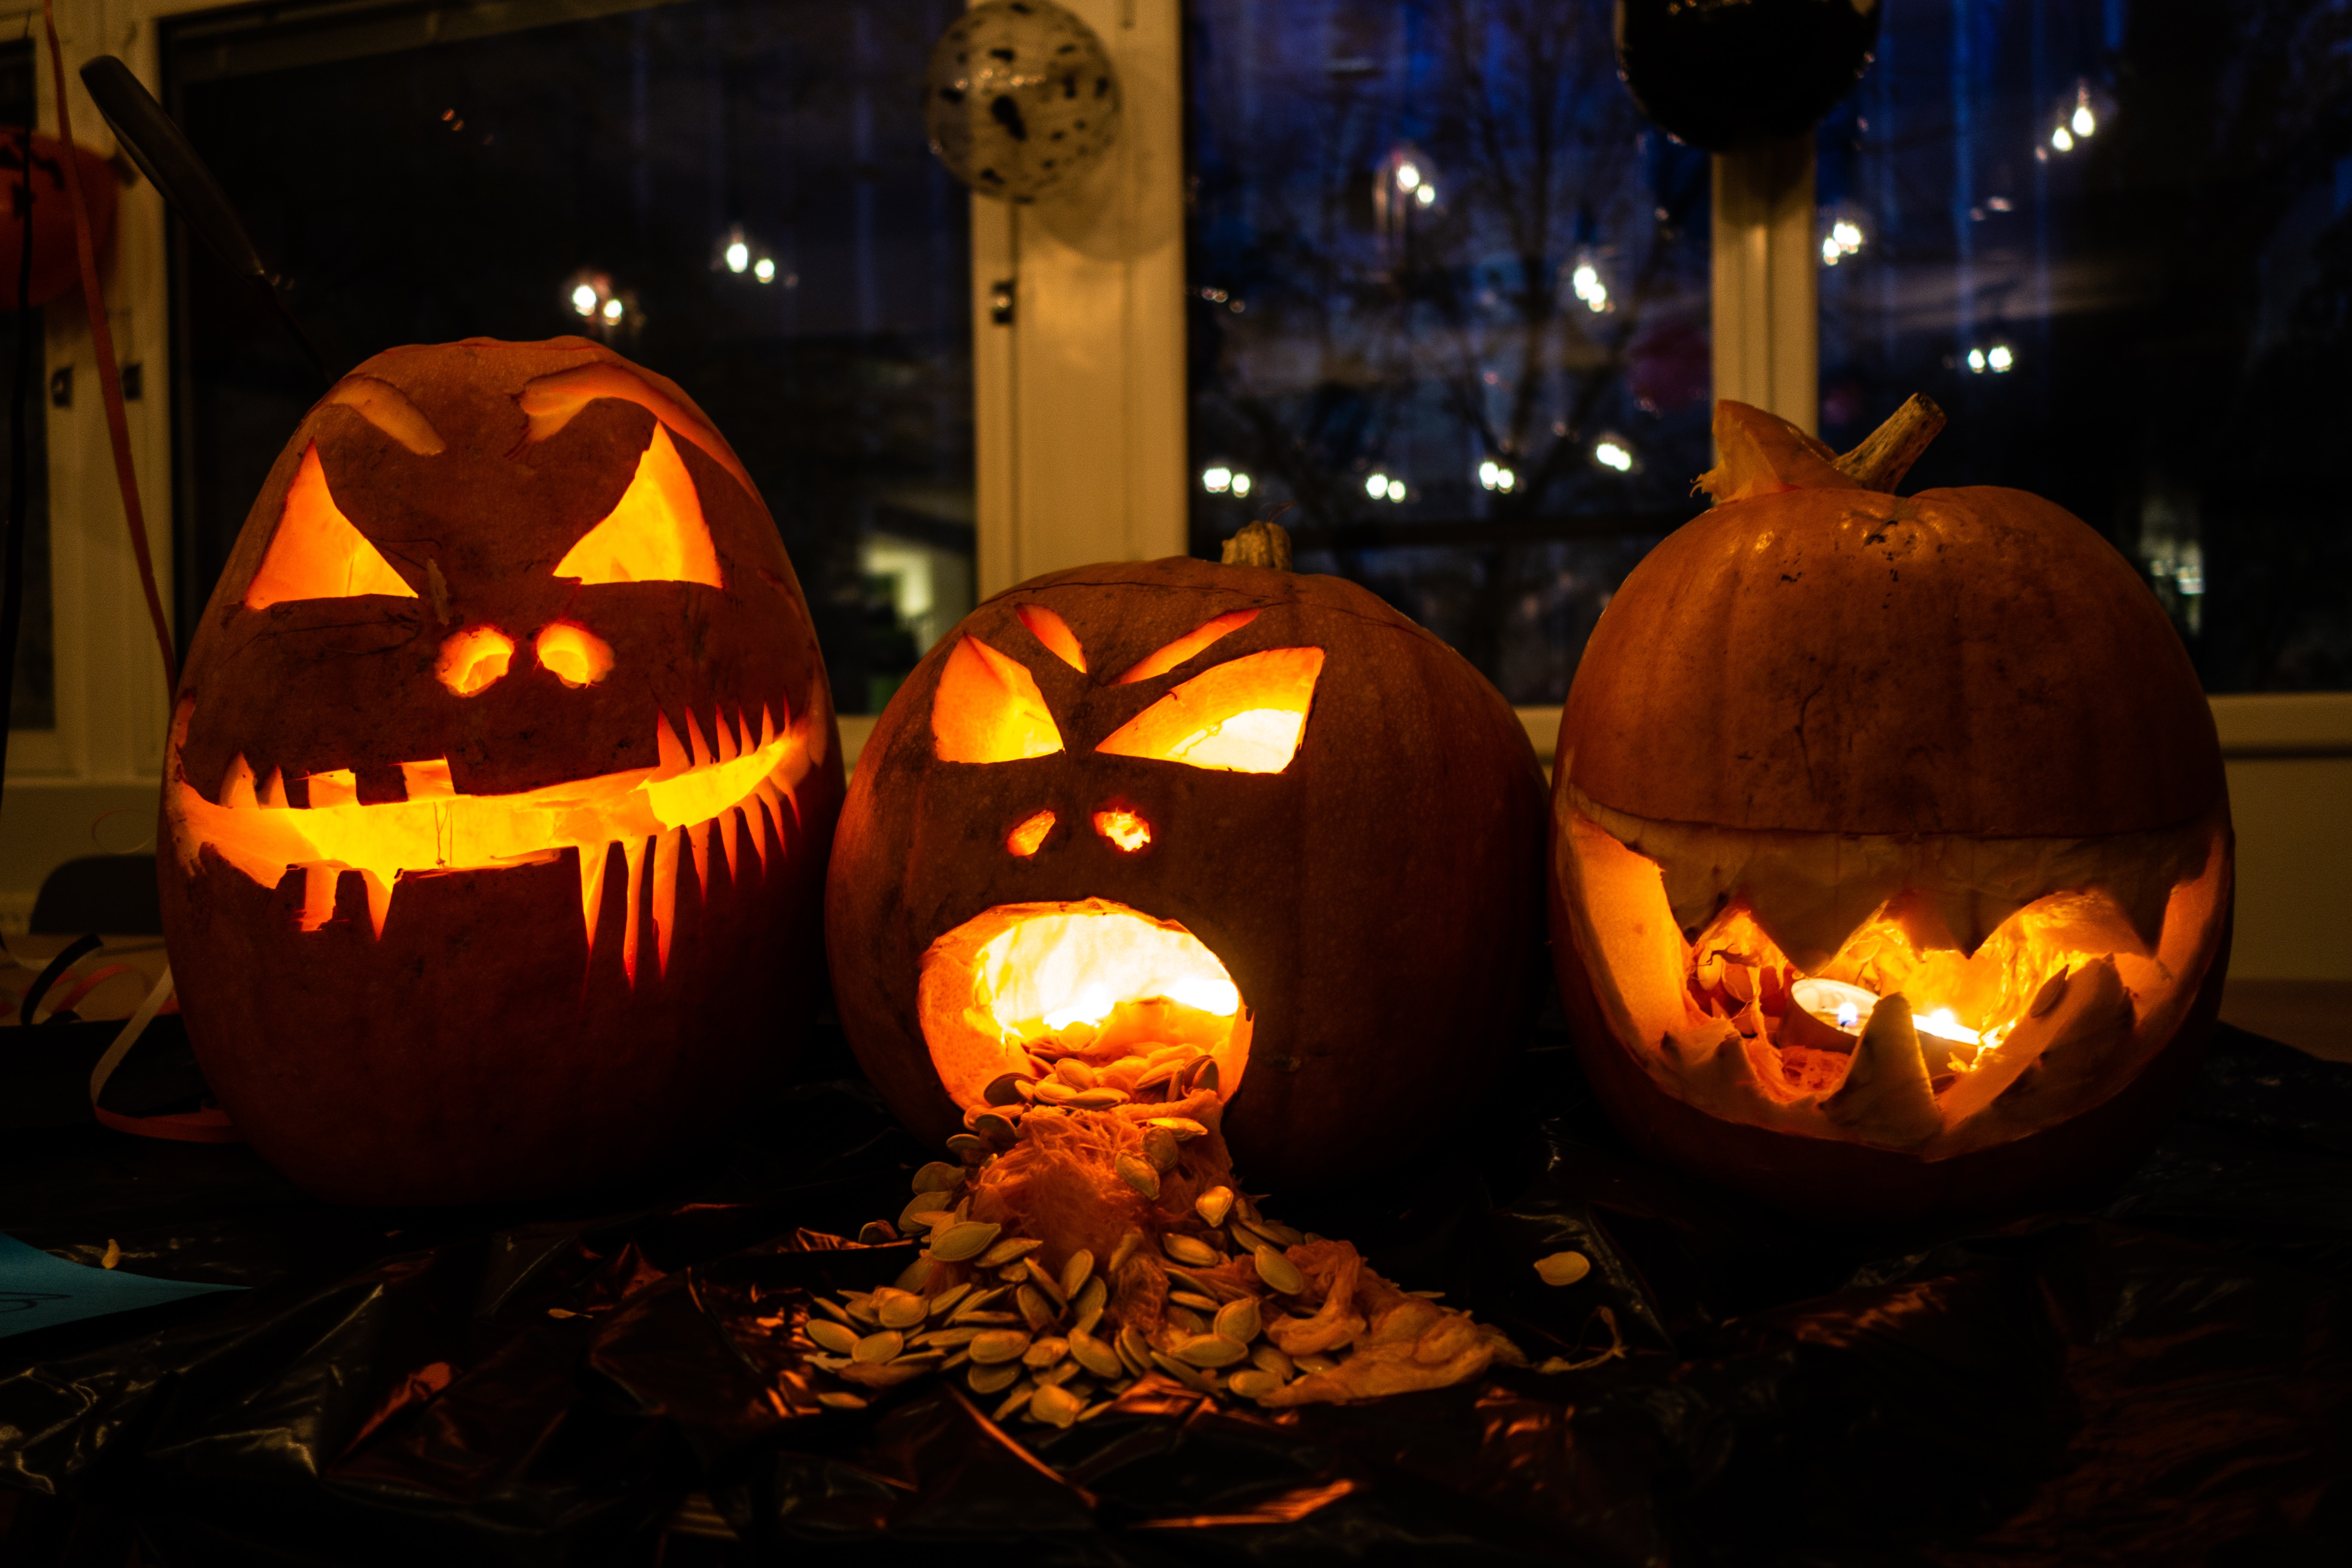 Three carved pumpkins that are lit up